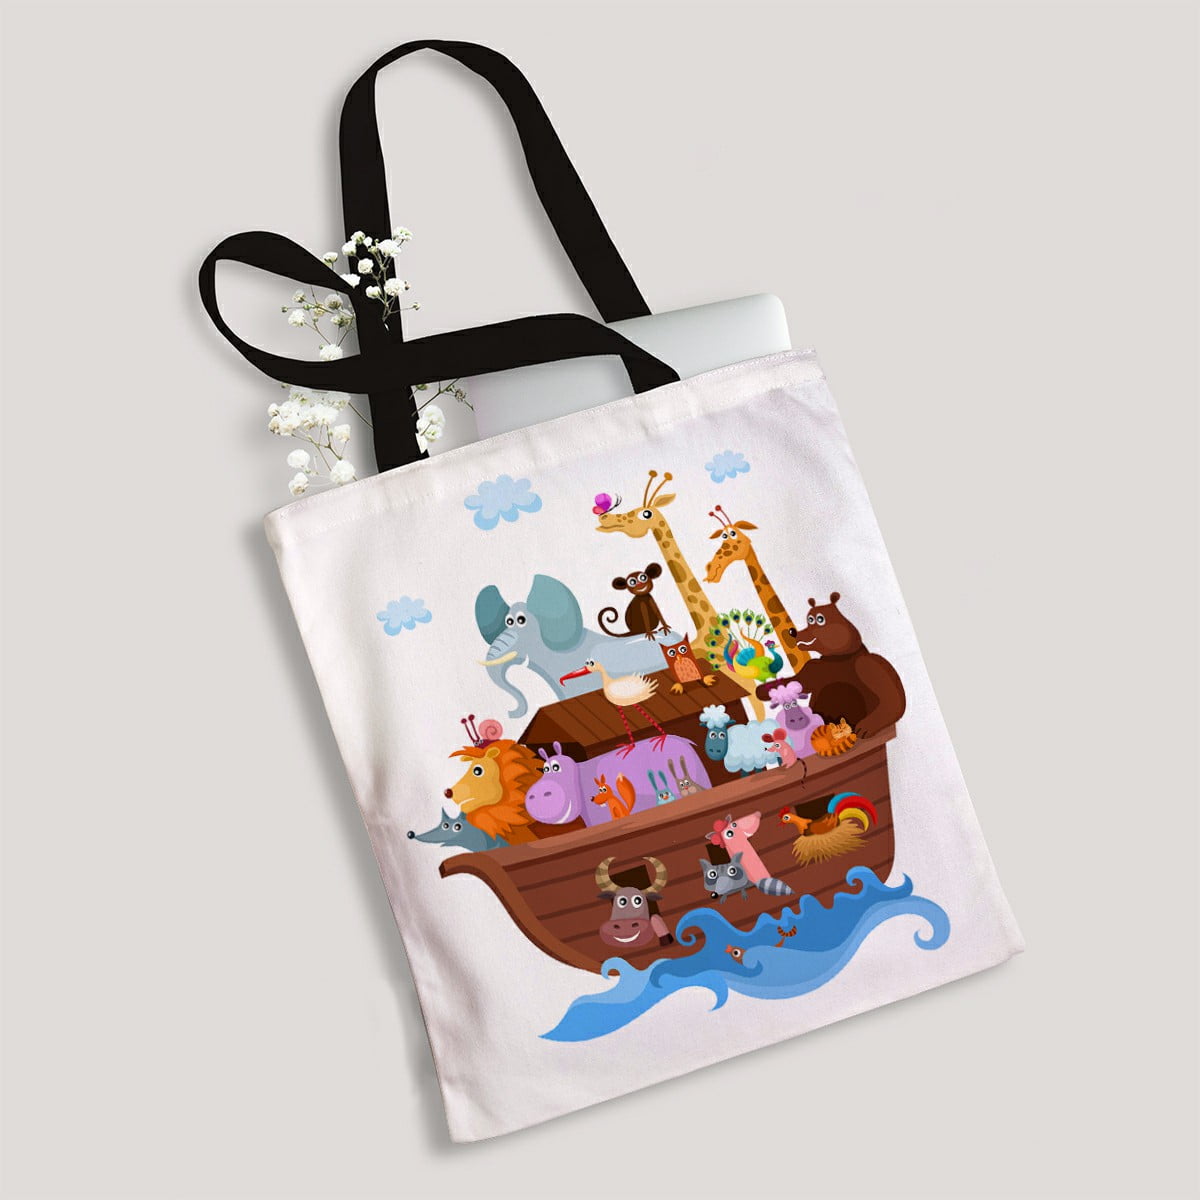 Noah's Ark with Animals Grocery Travel Reusable Tote Bag 